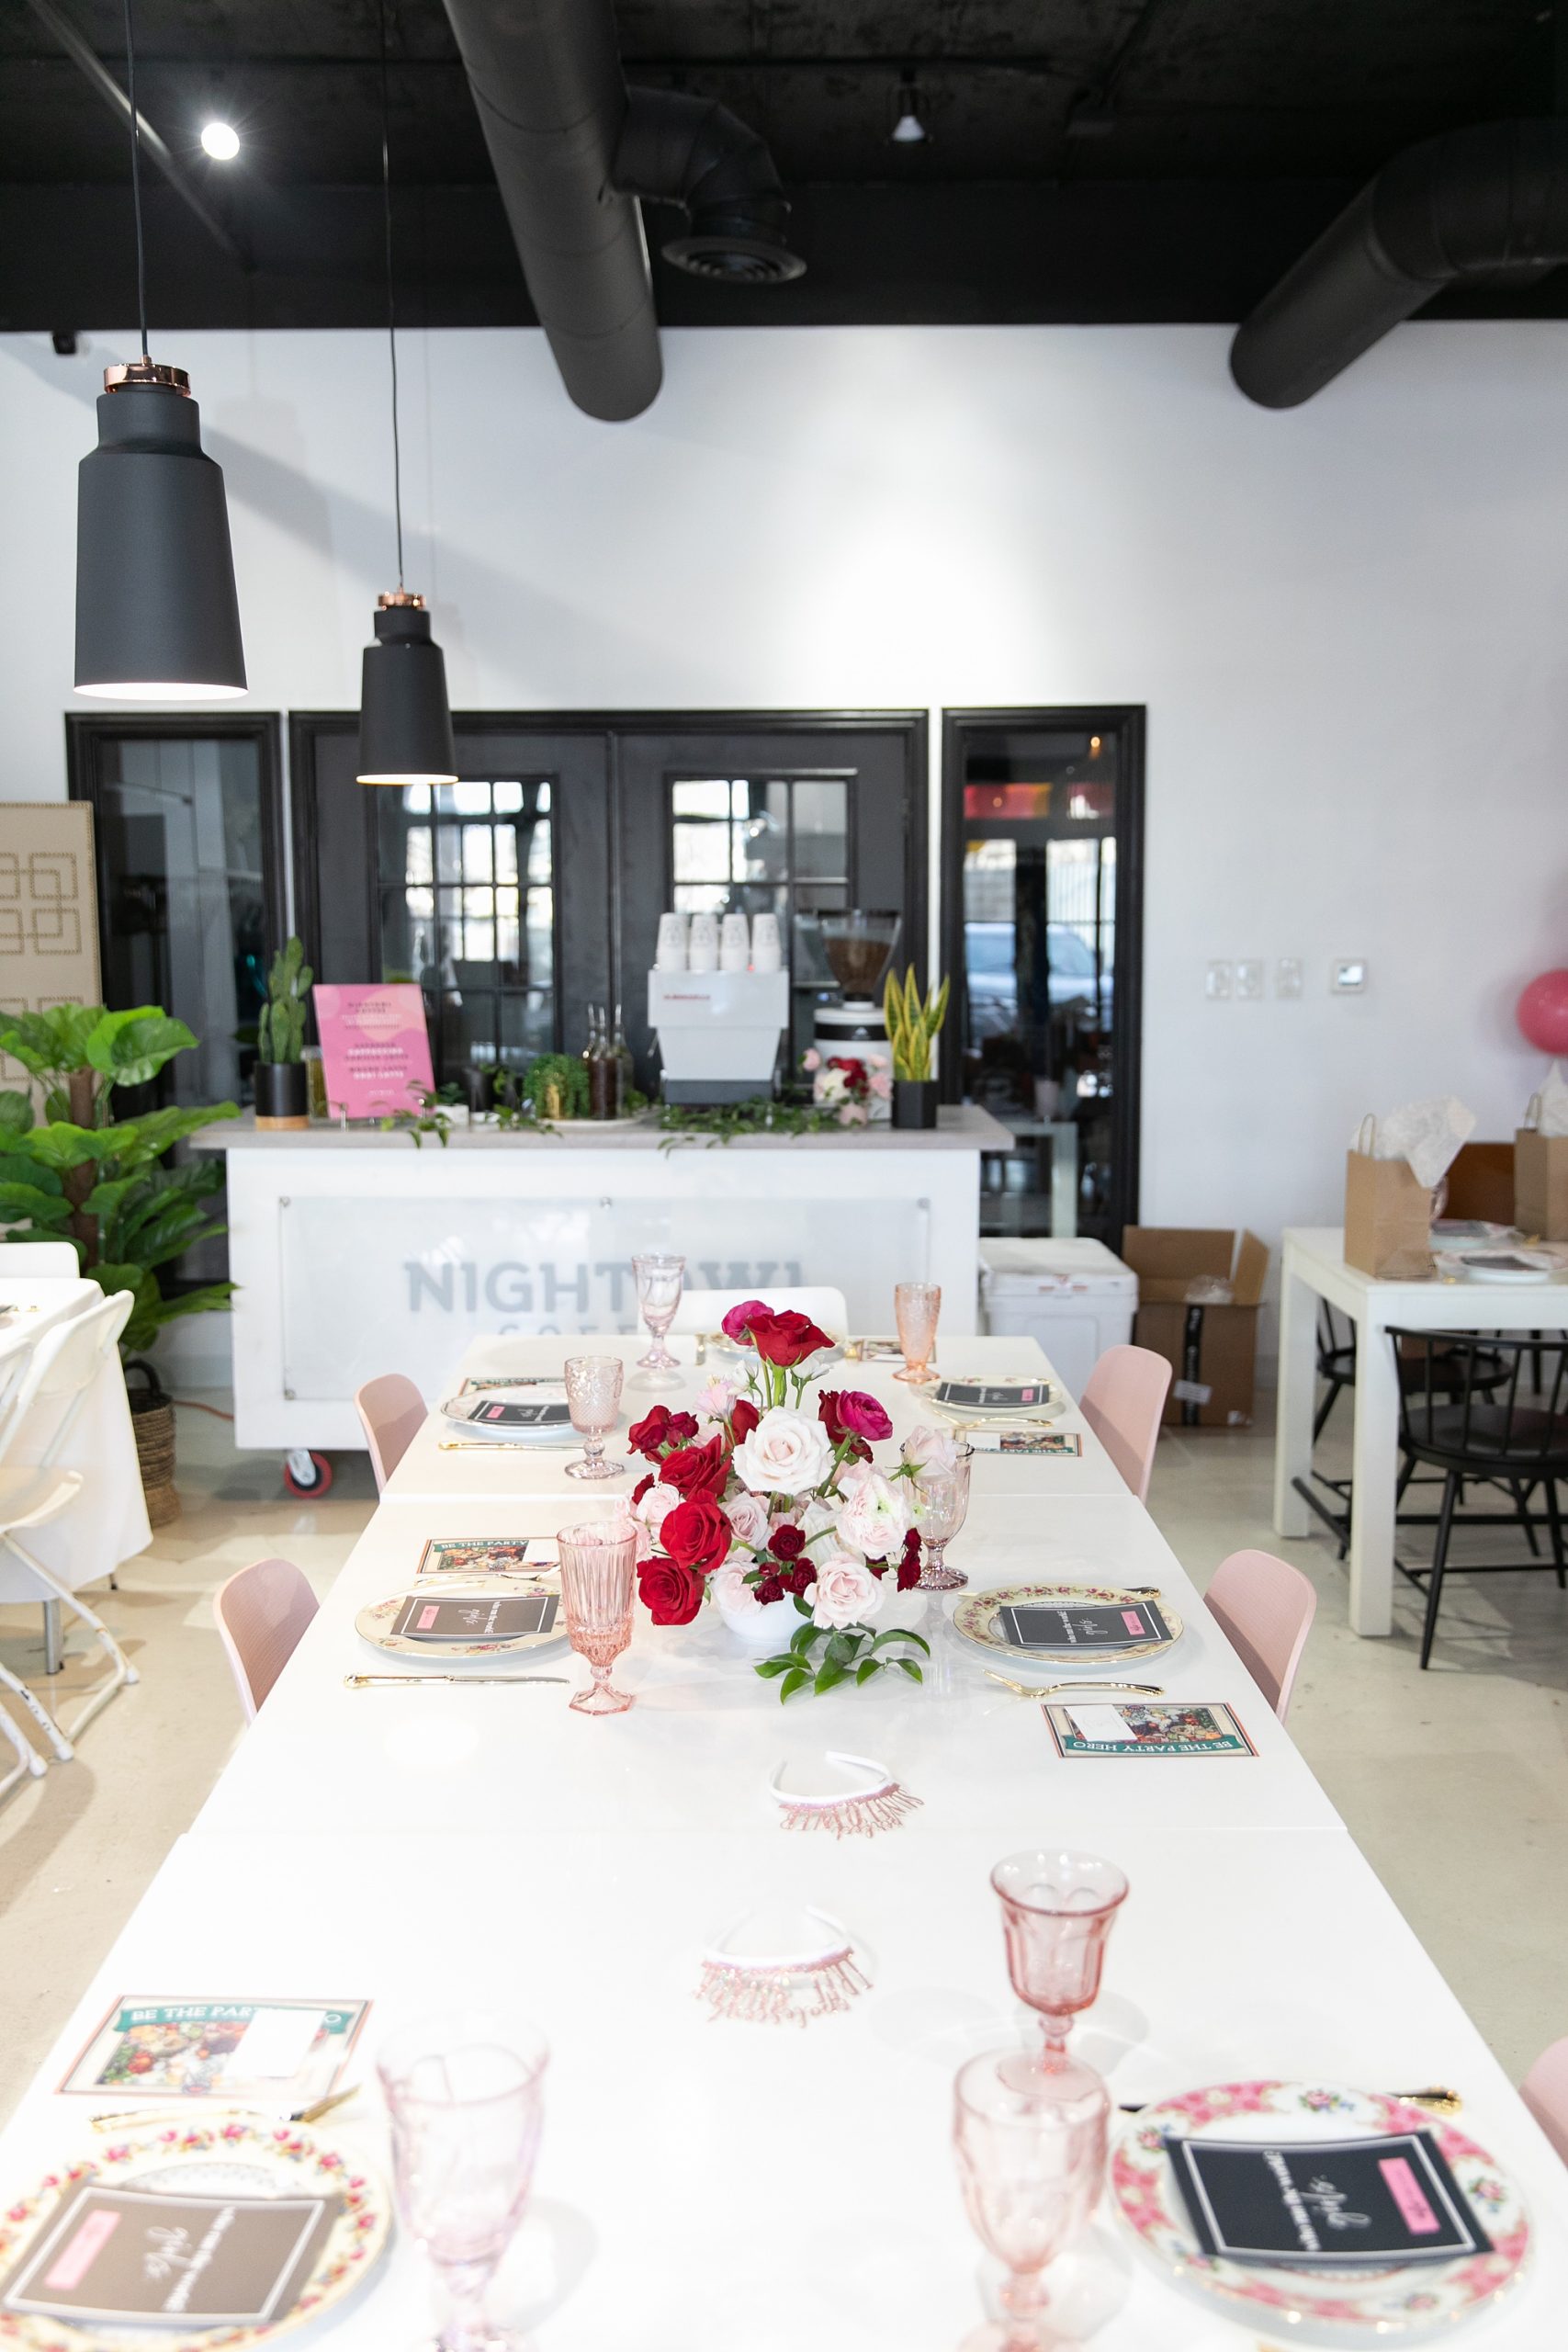 Dallas Galentine's Day event hosted by Dallas Girl Gang